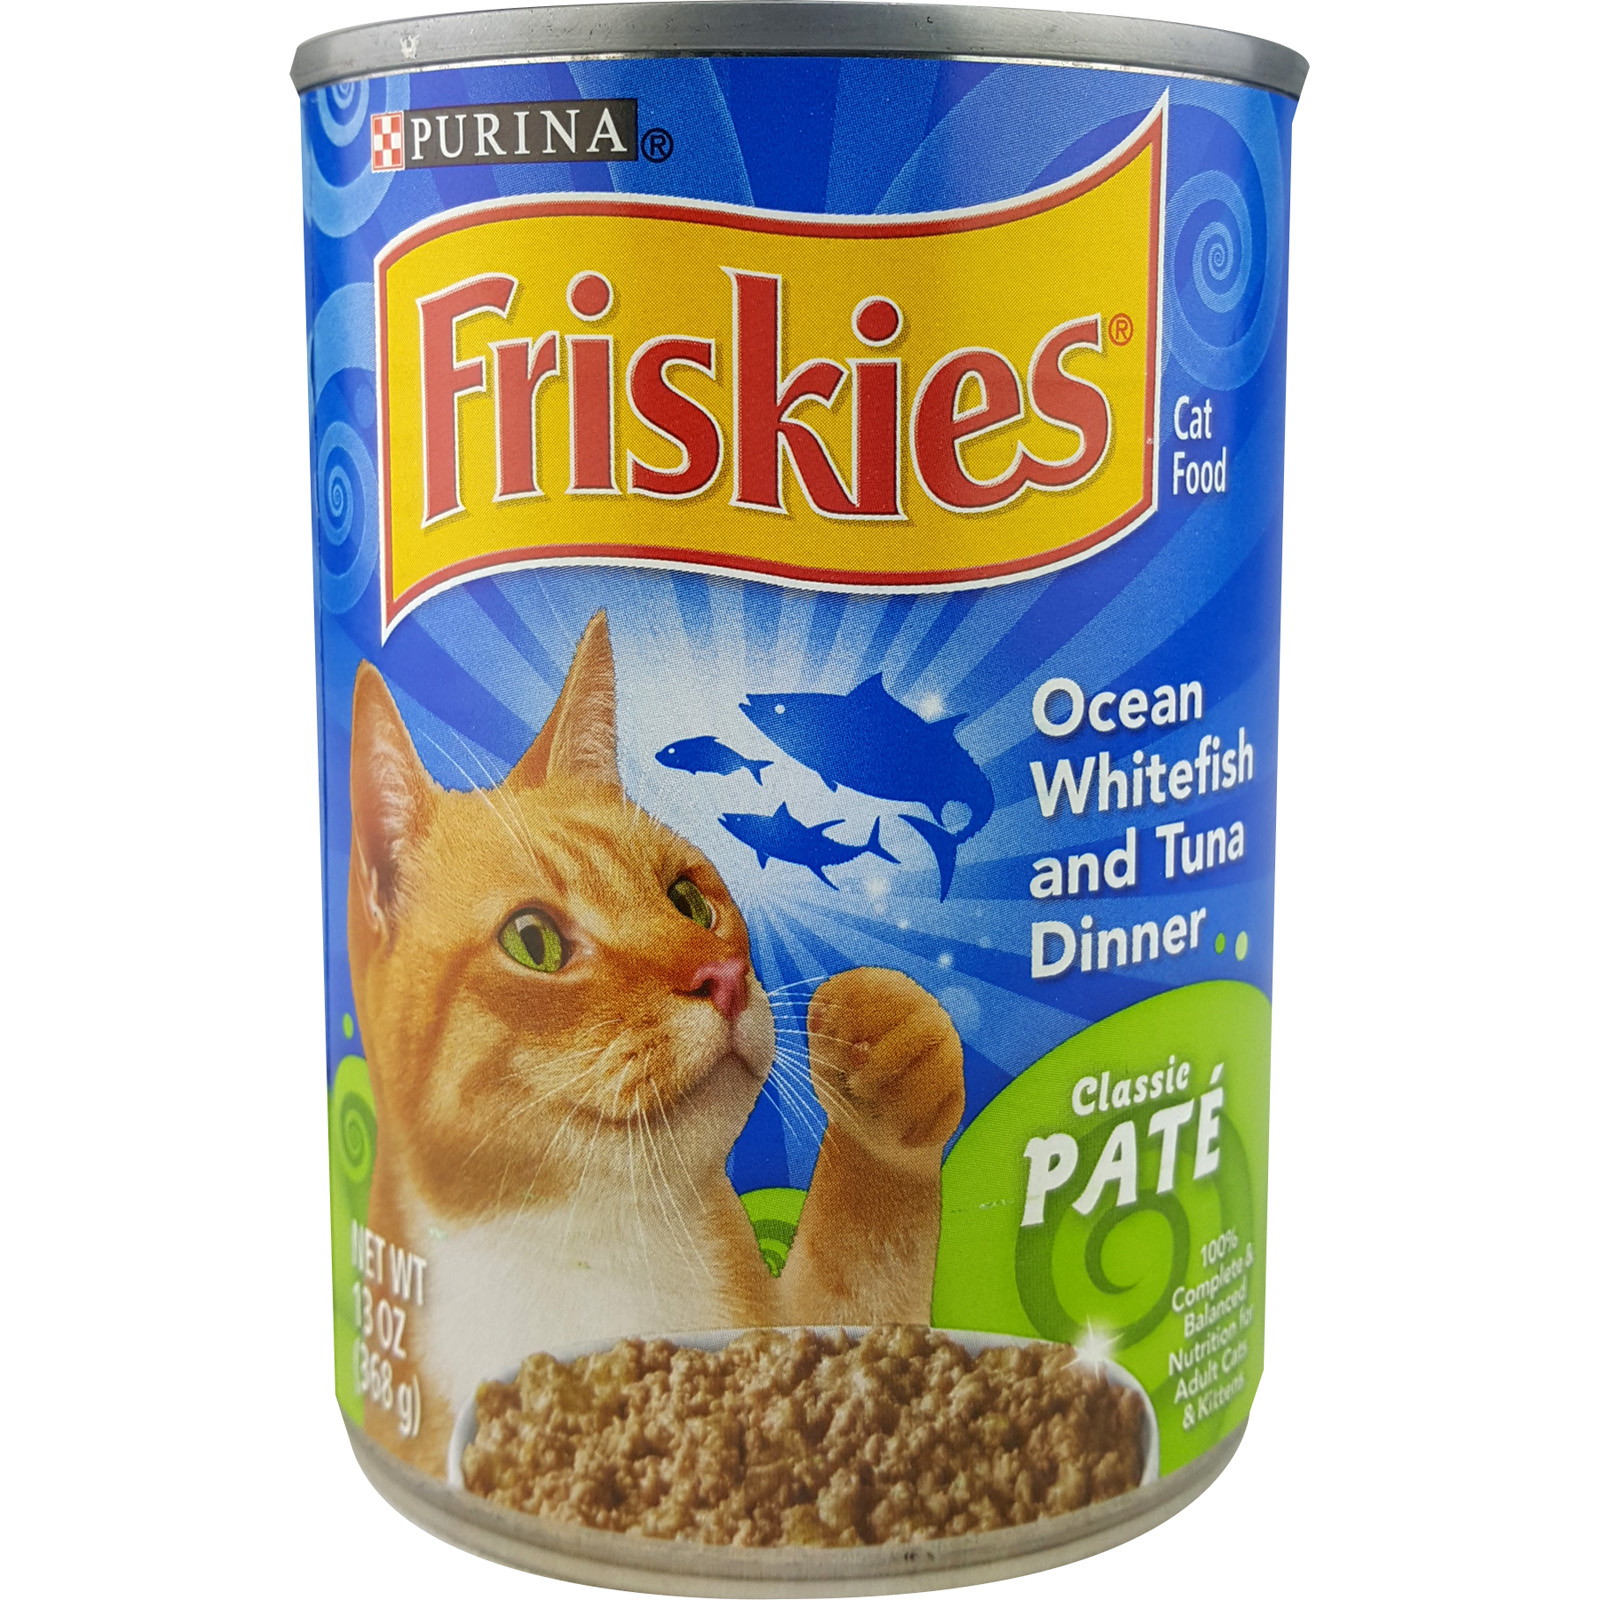 Cheapest place to buy cat food